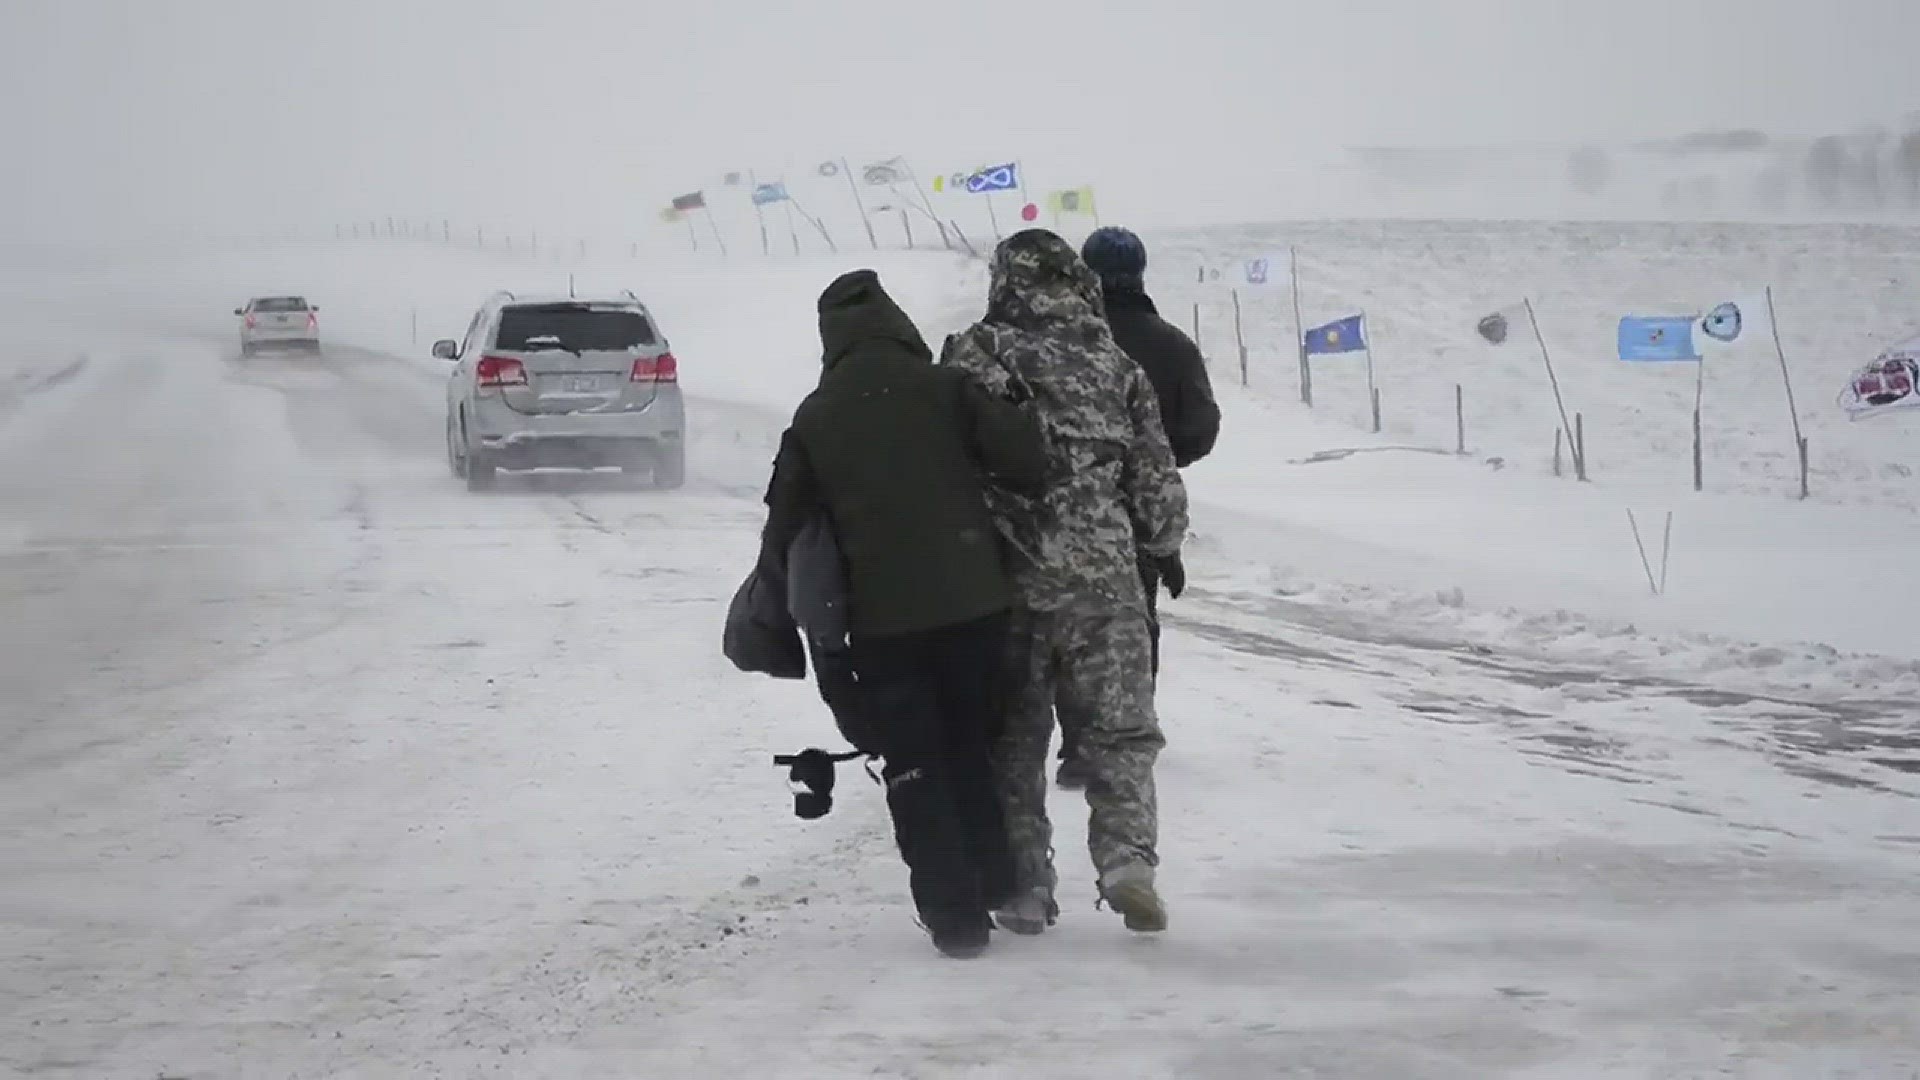 Brutal conditions at Standing Rock